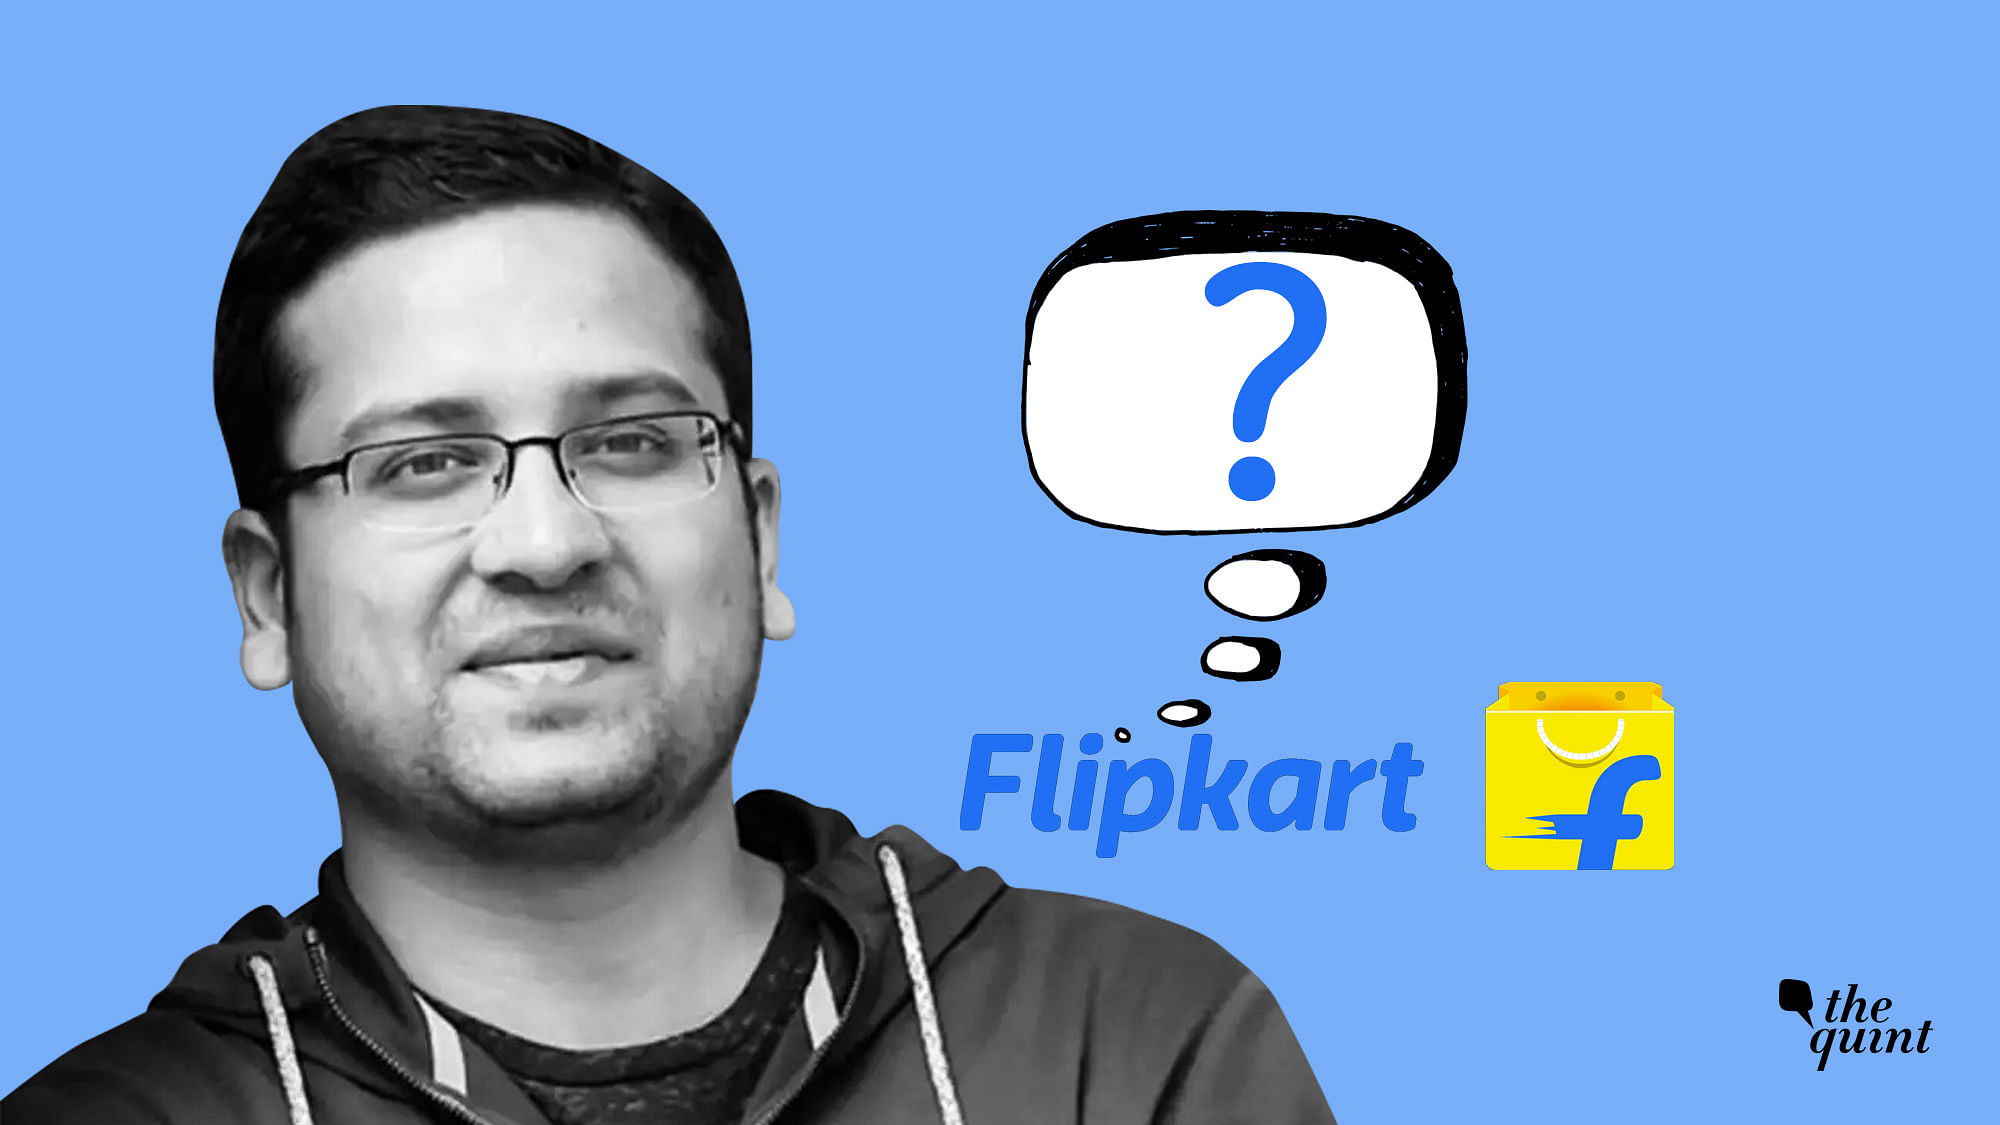 While Binny Bansal’s sudden exit from Flipkart has set tongues wagging in India’s tech space, there is a deafening silence from ground zero.